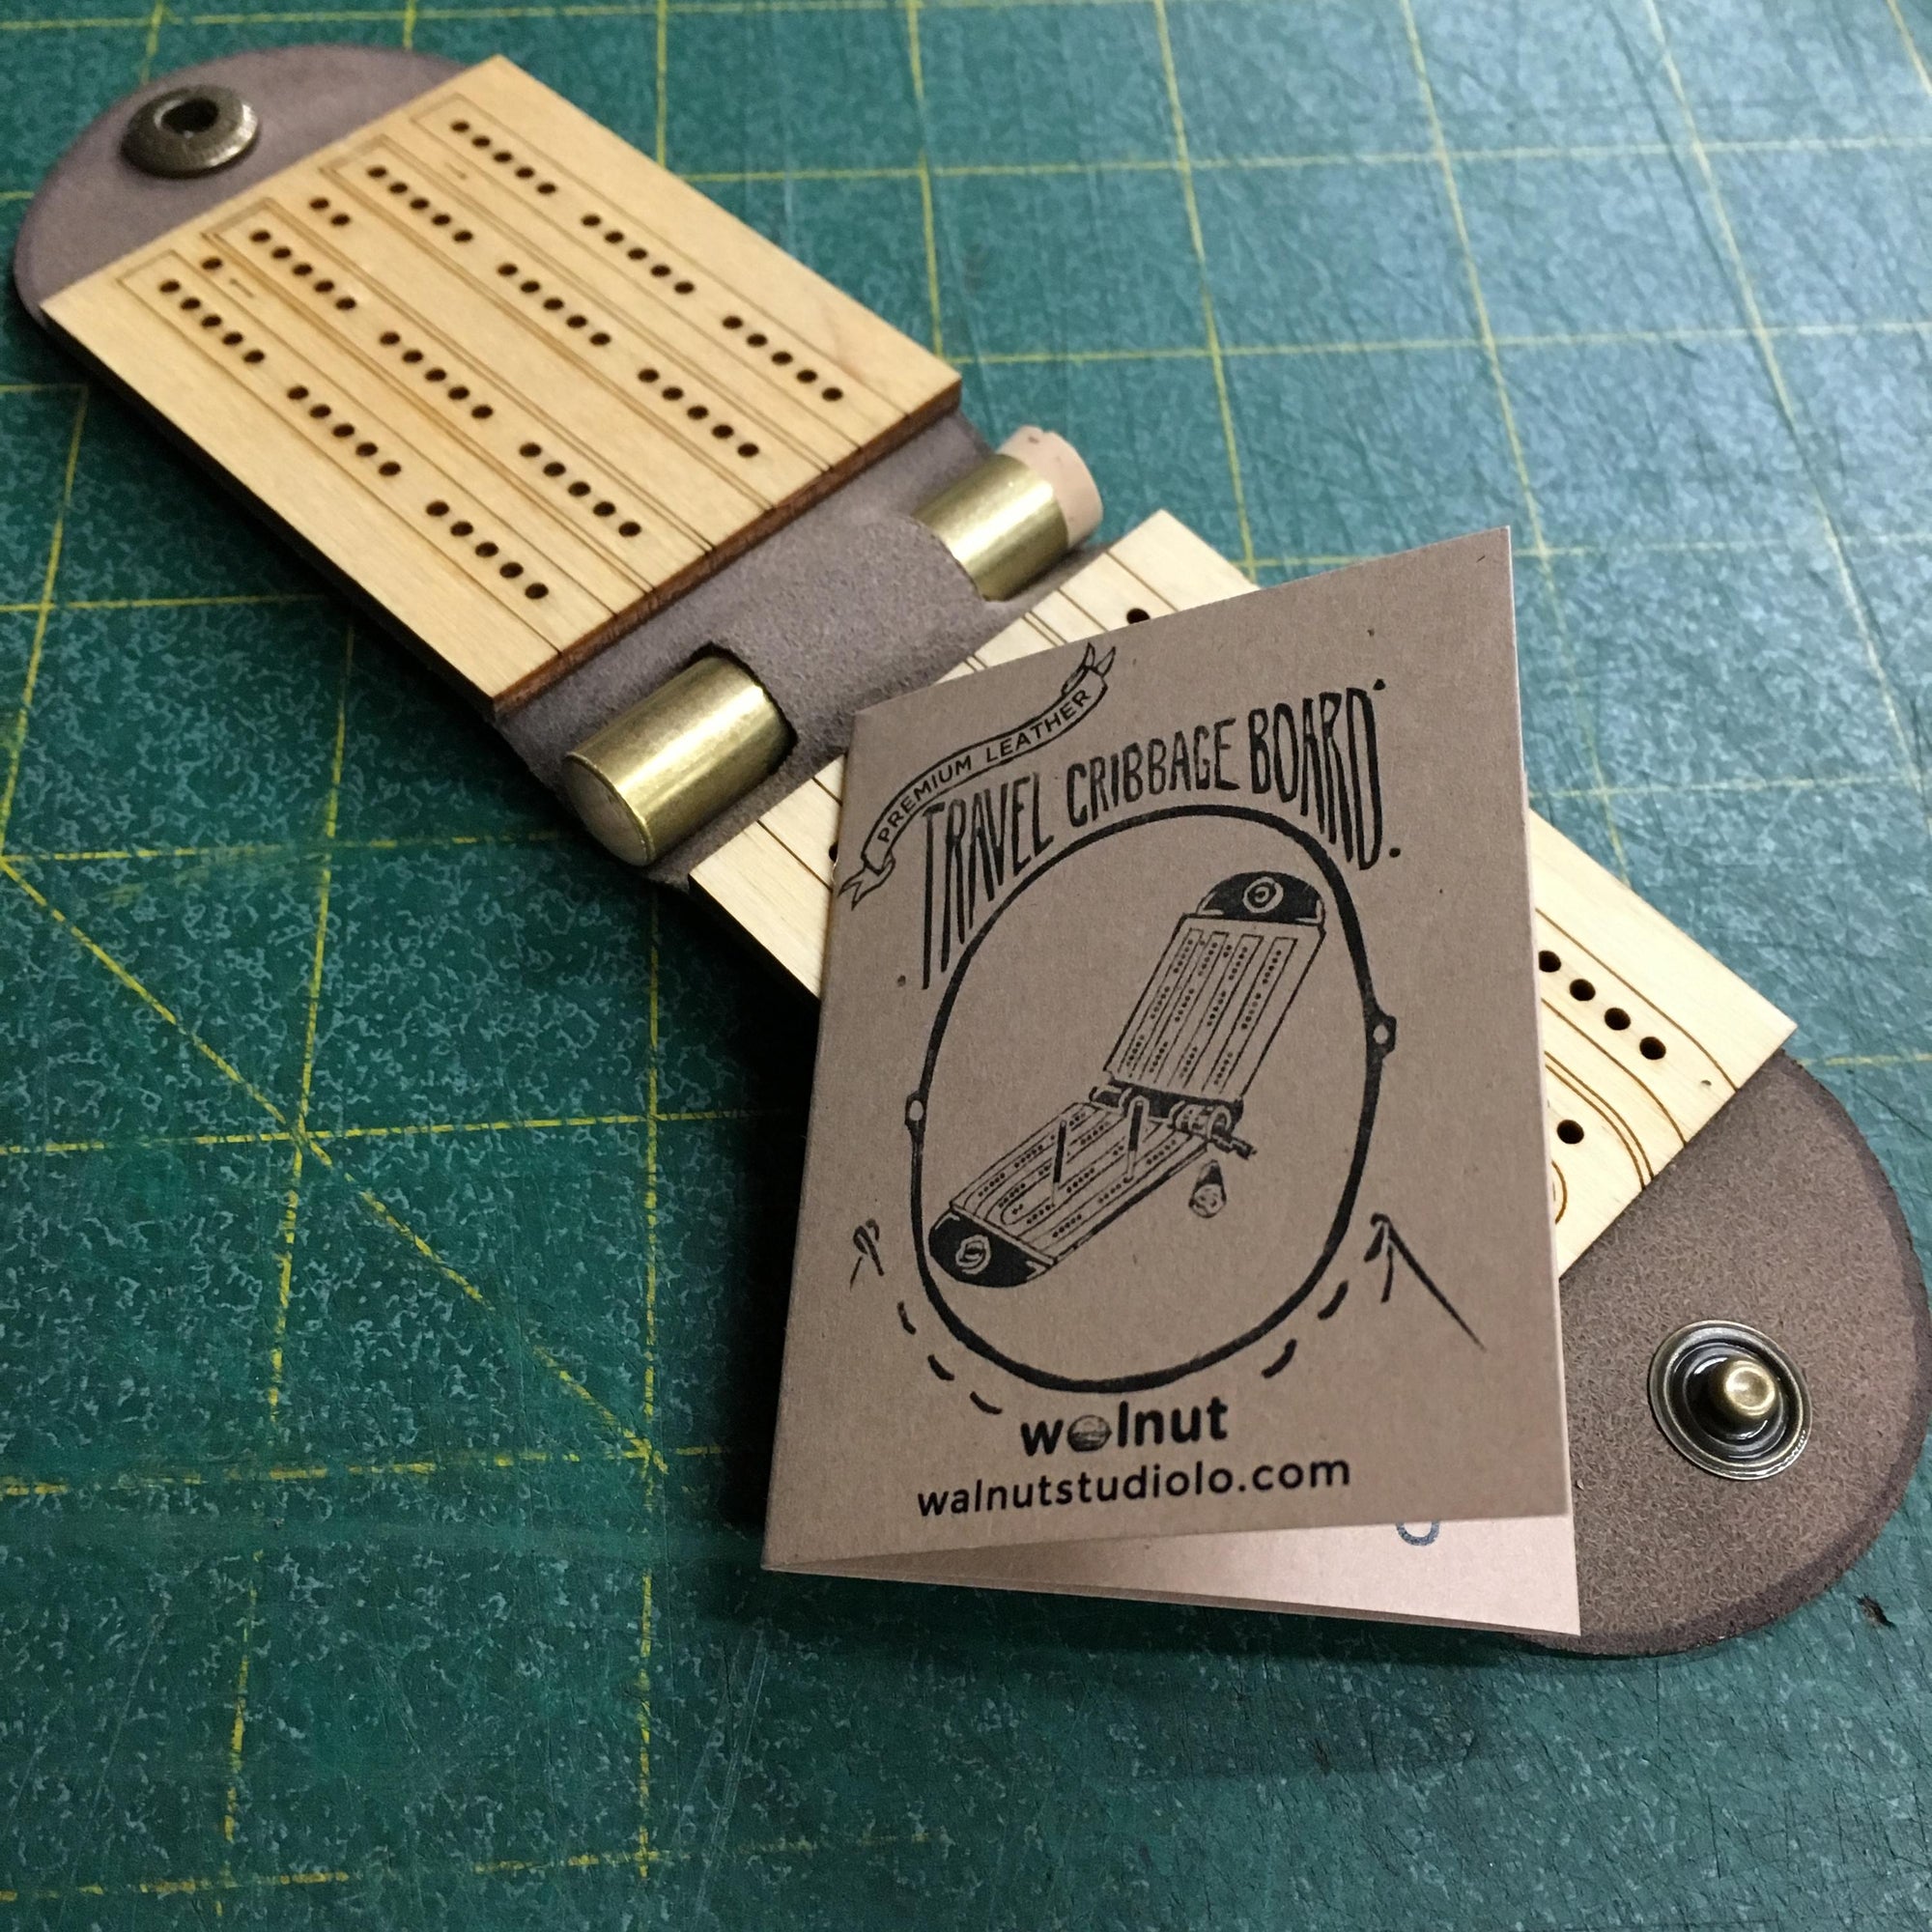 New! Presenting the Cribbage Minibook, now included with every Travel Cribbage Board